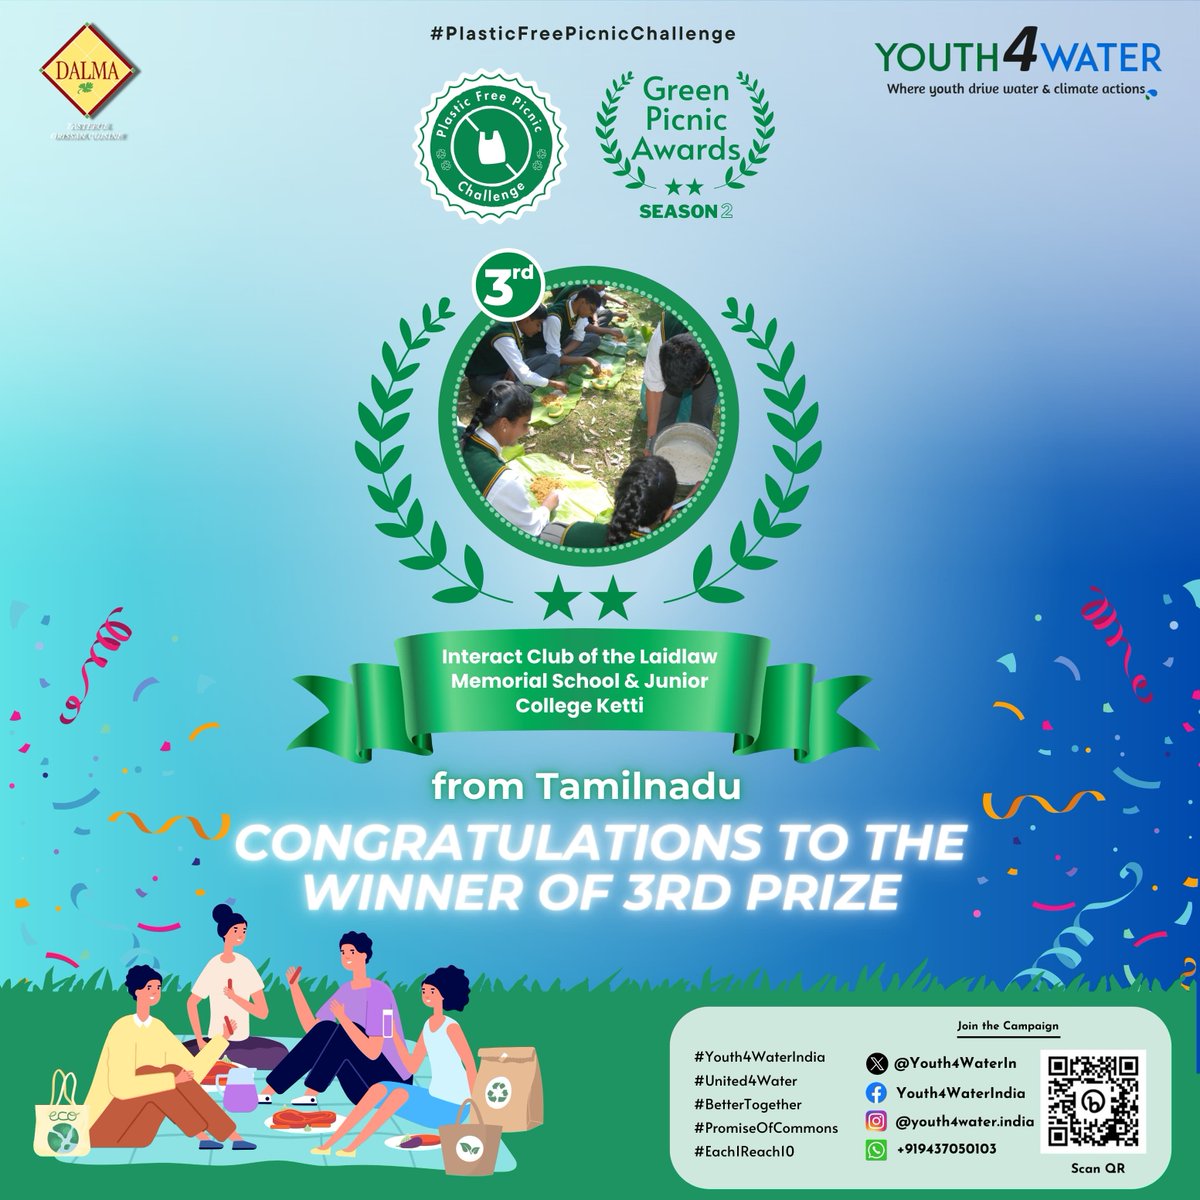 💐🎉🎊🥁Hurrrayyyyyyyy!🥁🎊🎉💐 Congratulations #InteractClub of the #Laidlaw Memorial School and Junior College, Ketti, Tamil Nadu, for winning the 3rd Prize under the #GreenPicnicAwards #Season2 competition. @Rotary @RotaryIndia